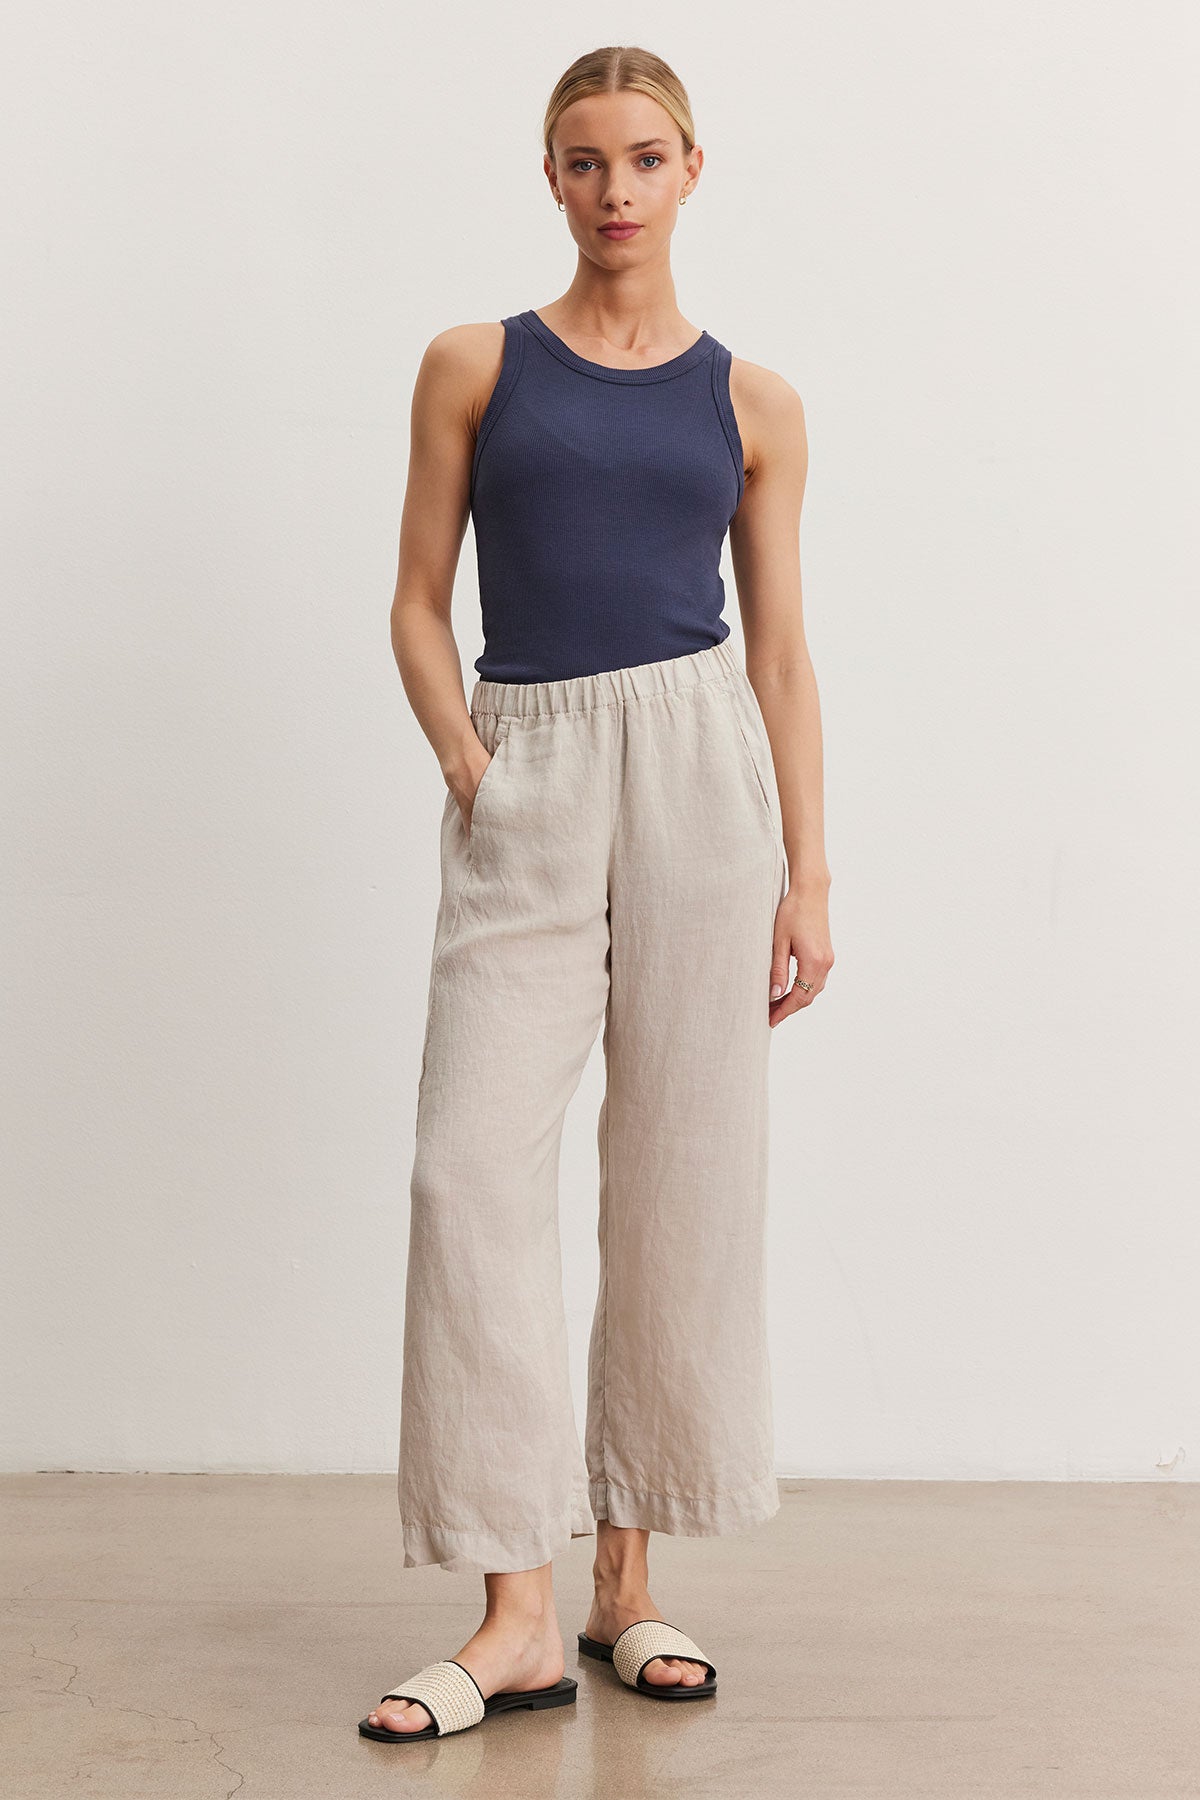 A person stands against a plain white background wearing a navy blue sleeveless top, Velvet by Graham & Spencer LOLA LINEN PANT with an elastic waist, and white slide sandals. They have their hands in their pockets.-36998848315585